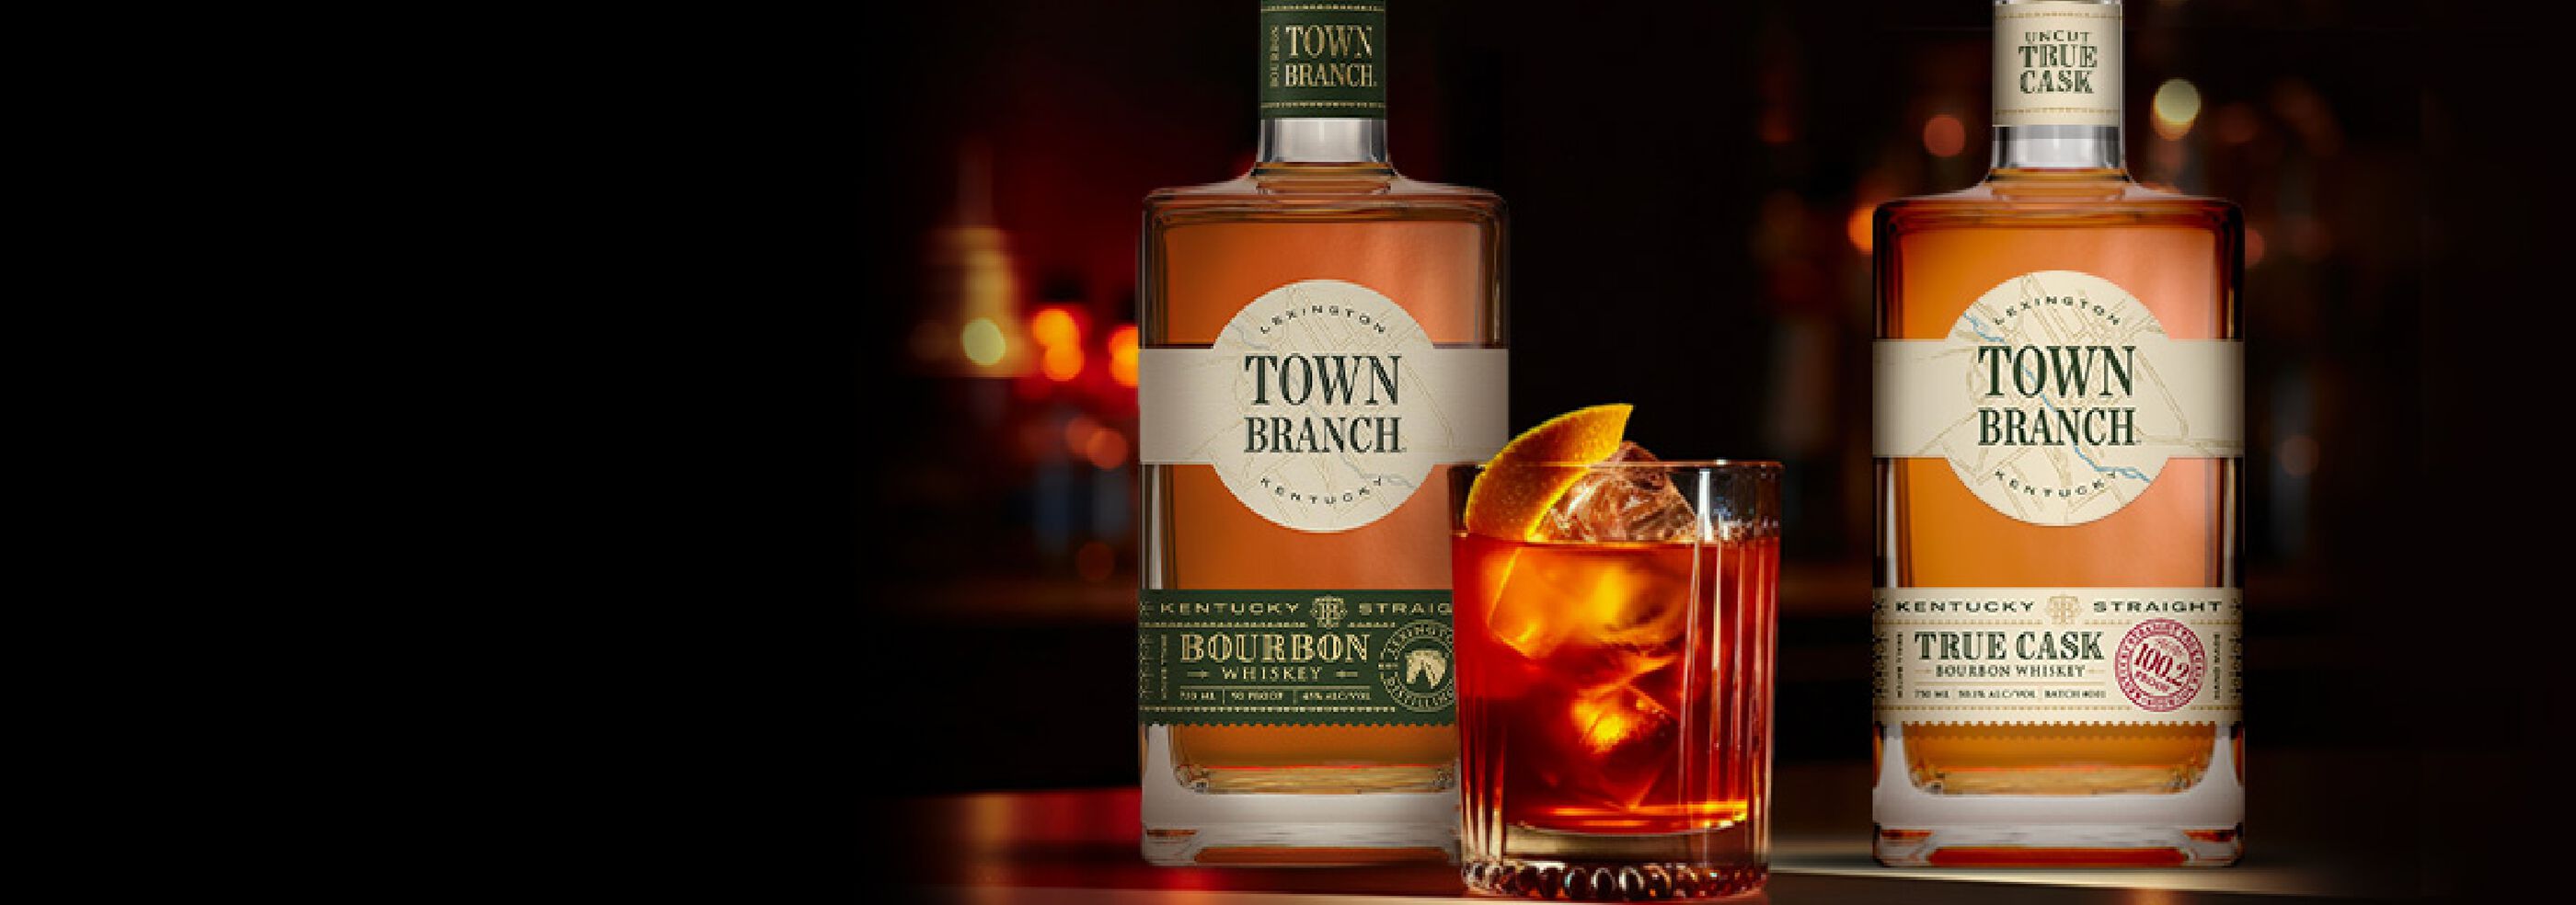 Town Branch bottles with a cocktail